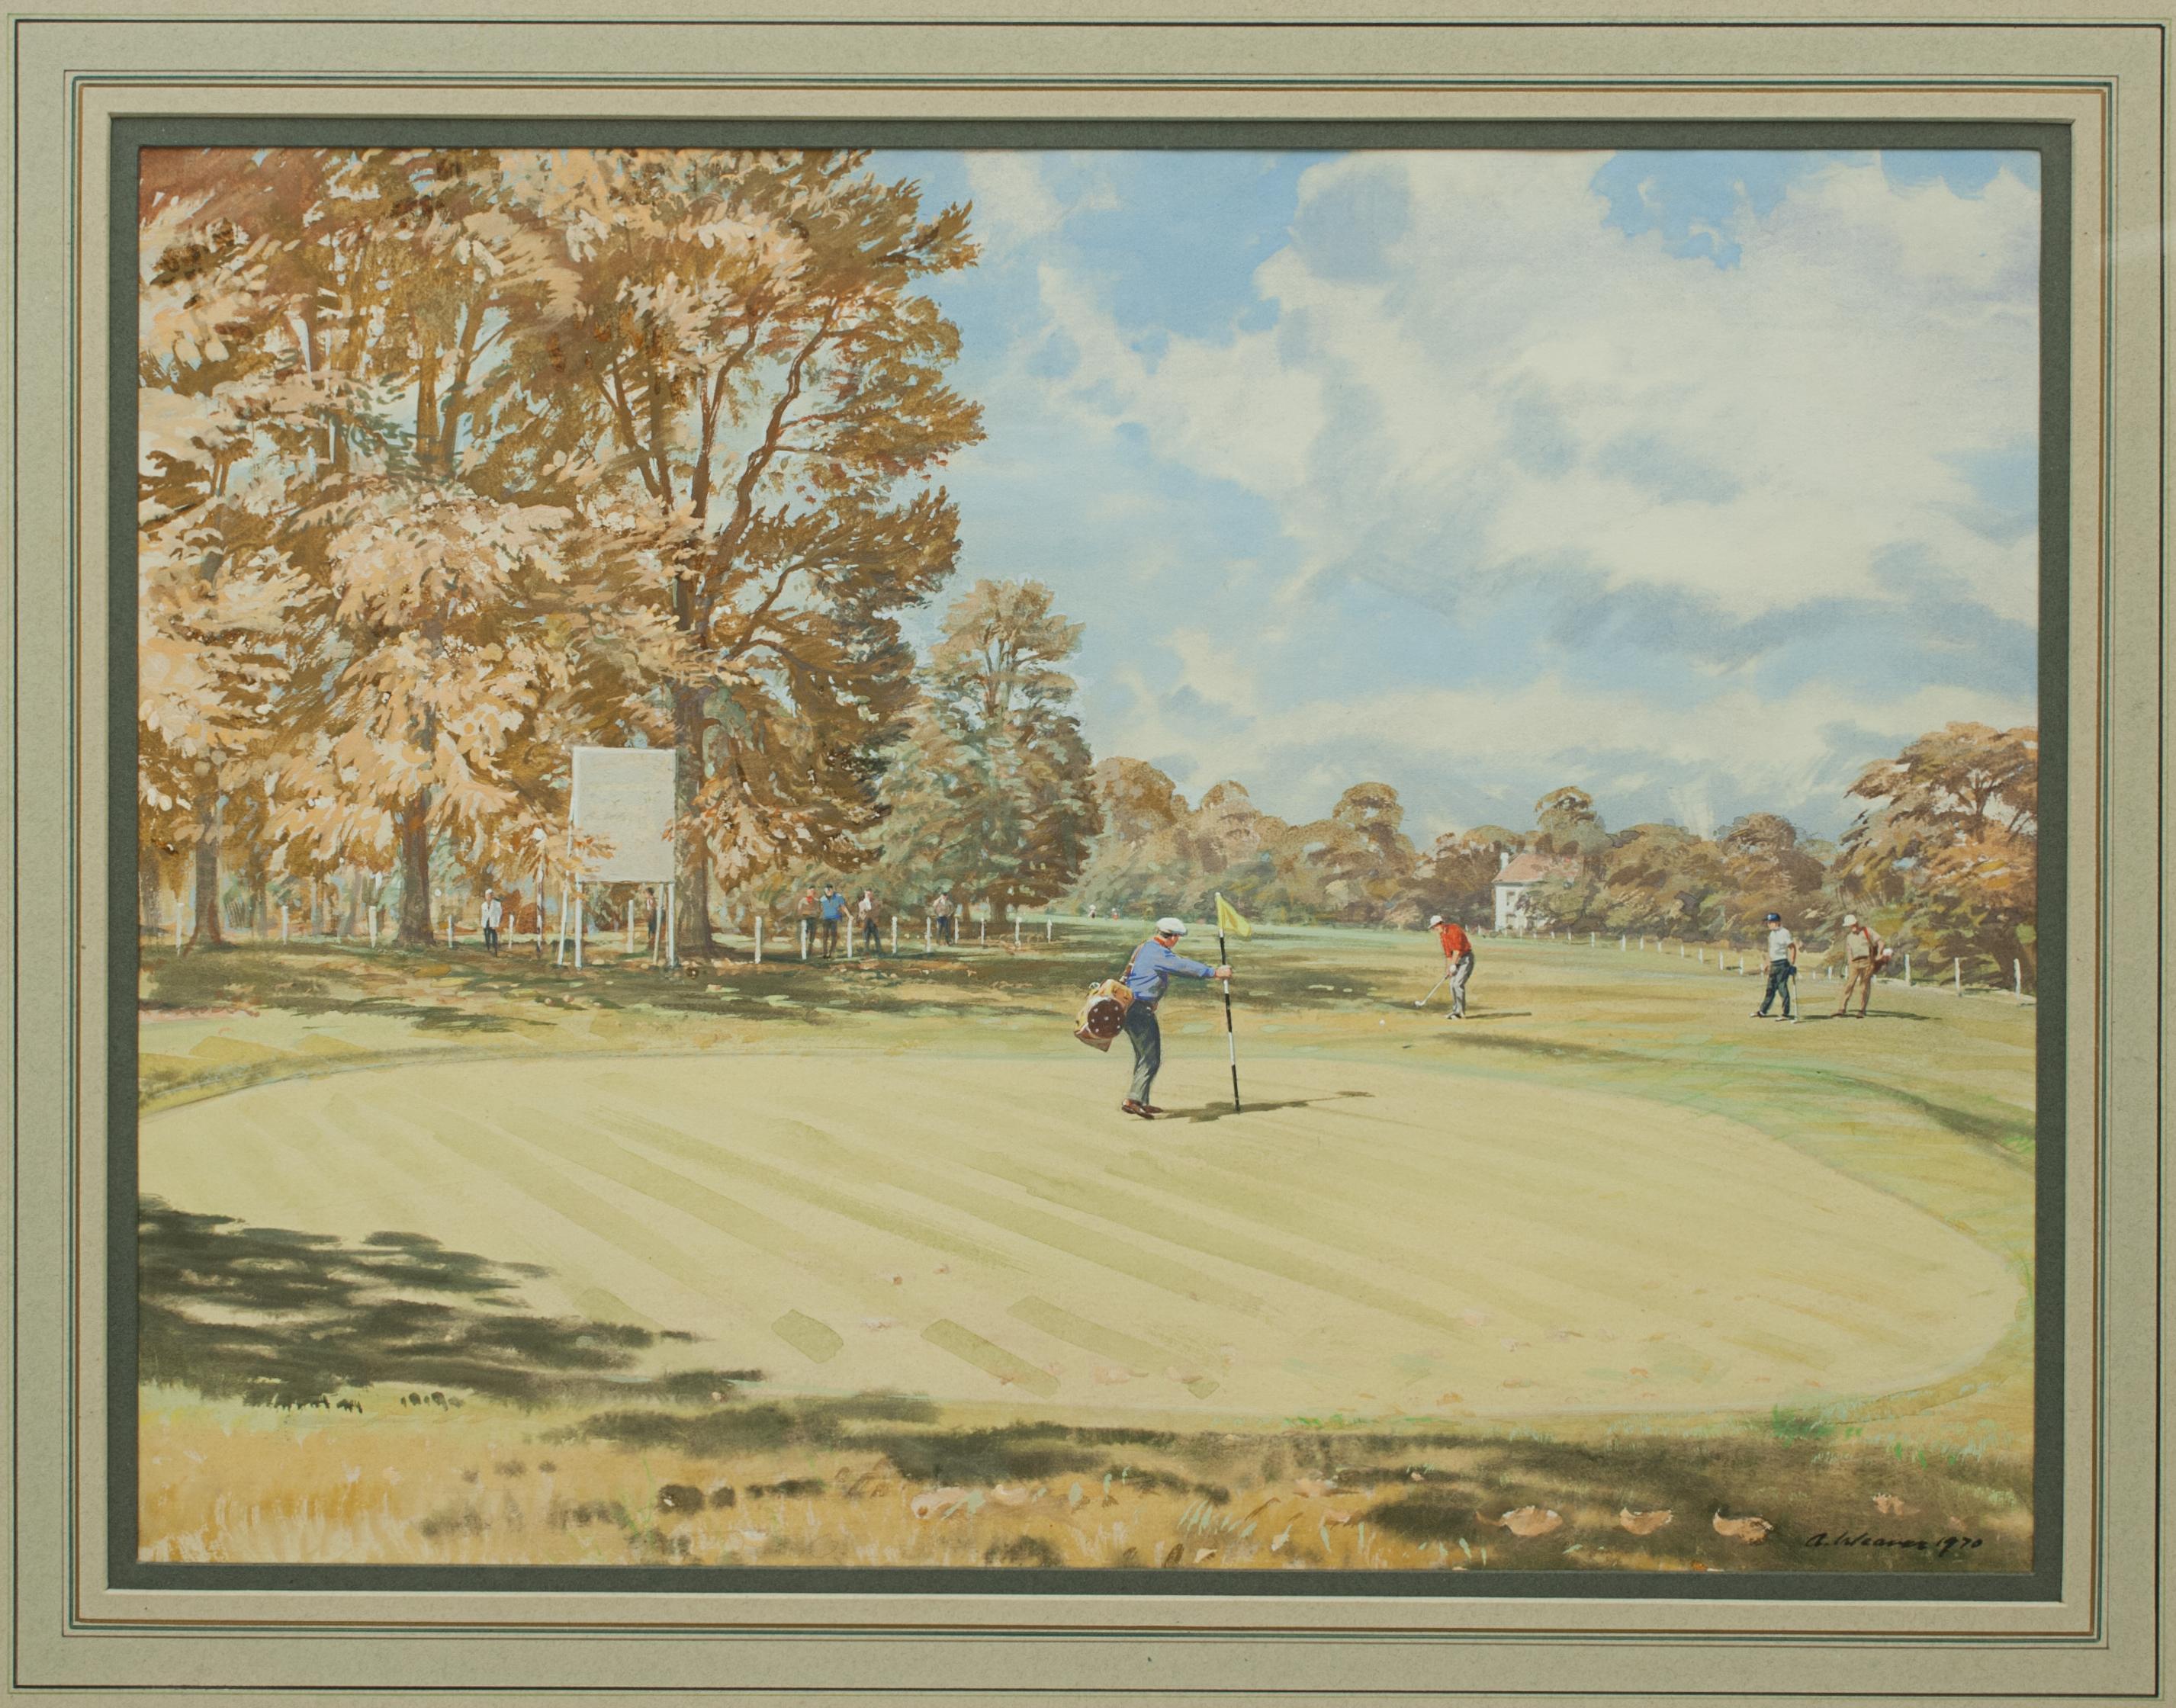 Sporting Art Original Golf Watercolour, Wentworth West Course, 18th Green by Arthur Weaver